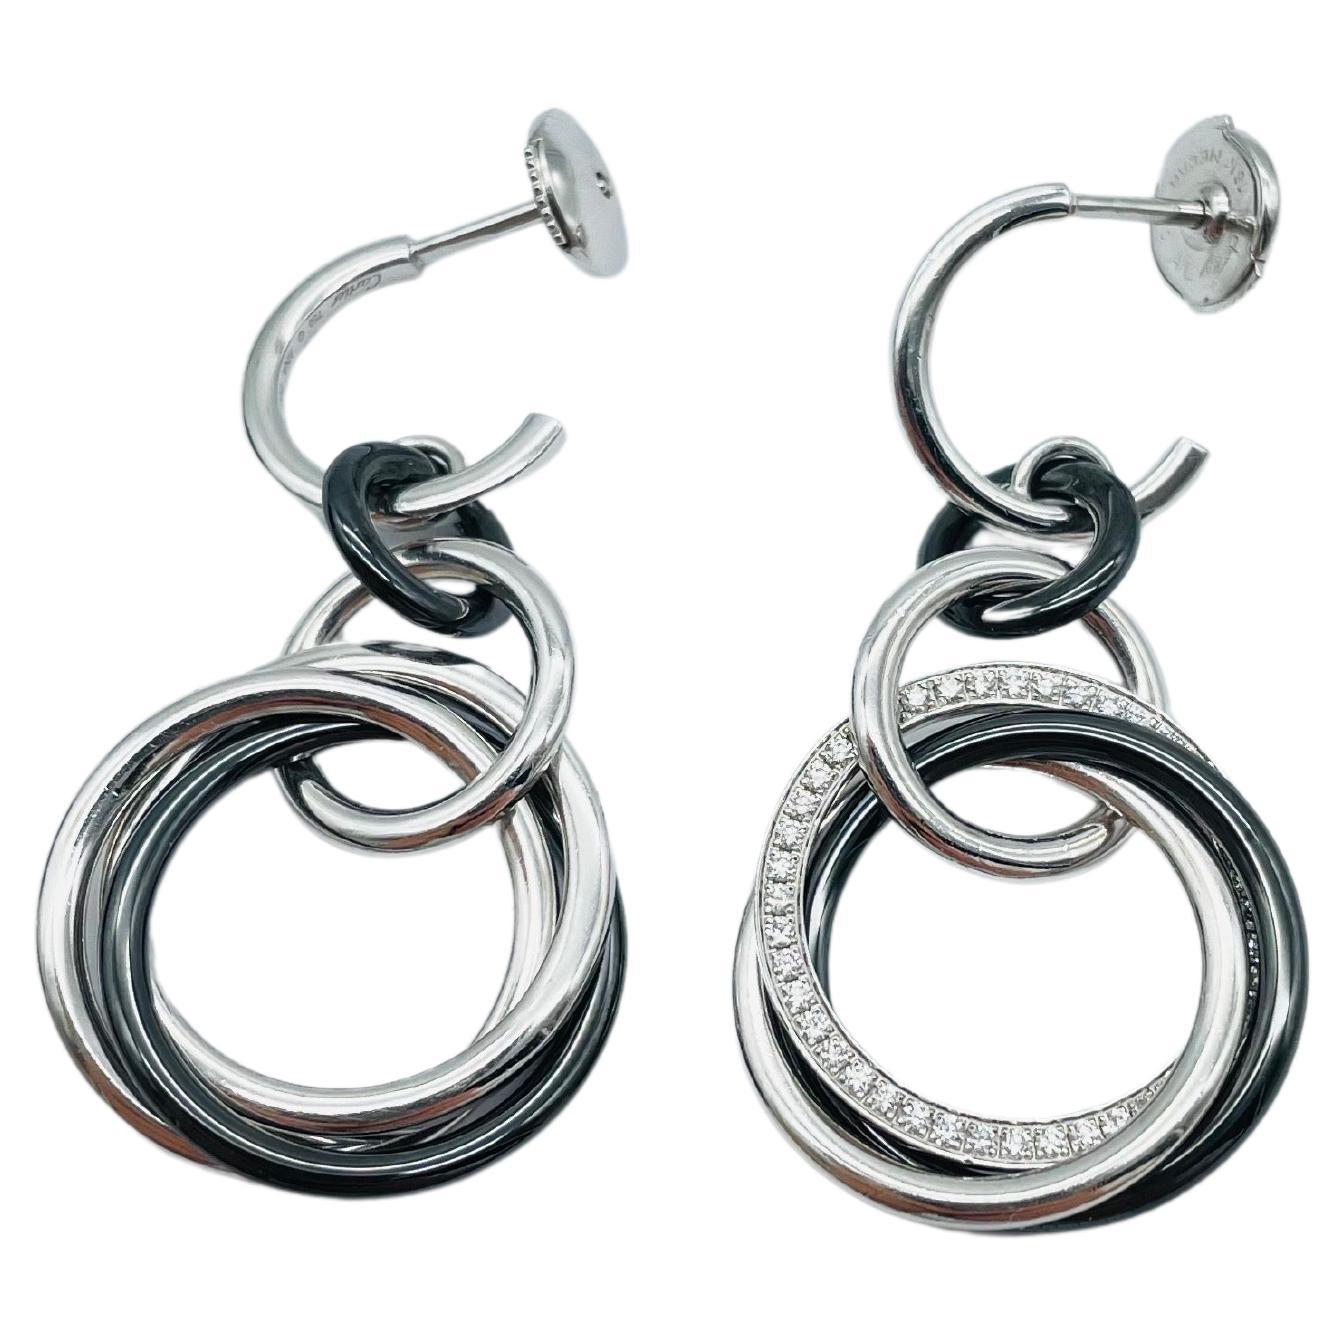 Cartier Trinity Earrings Diamond/White Gold/Ceramic

Immerse yourself in a dreamlike realm of elegance and enchantment with the exquisite Trinity earrings crafted in 18-karat white gold and black ceramic. These mesmerizing creations are adorned with